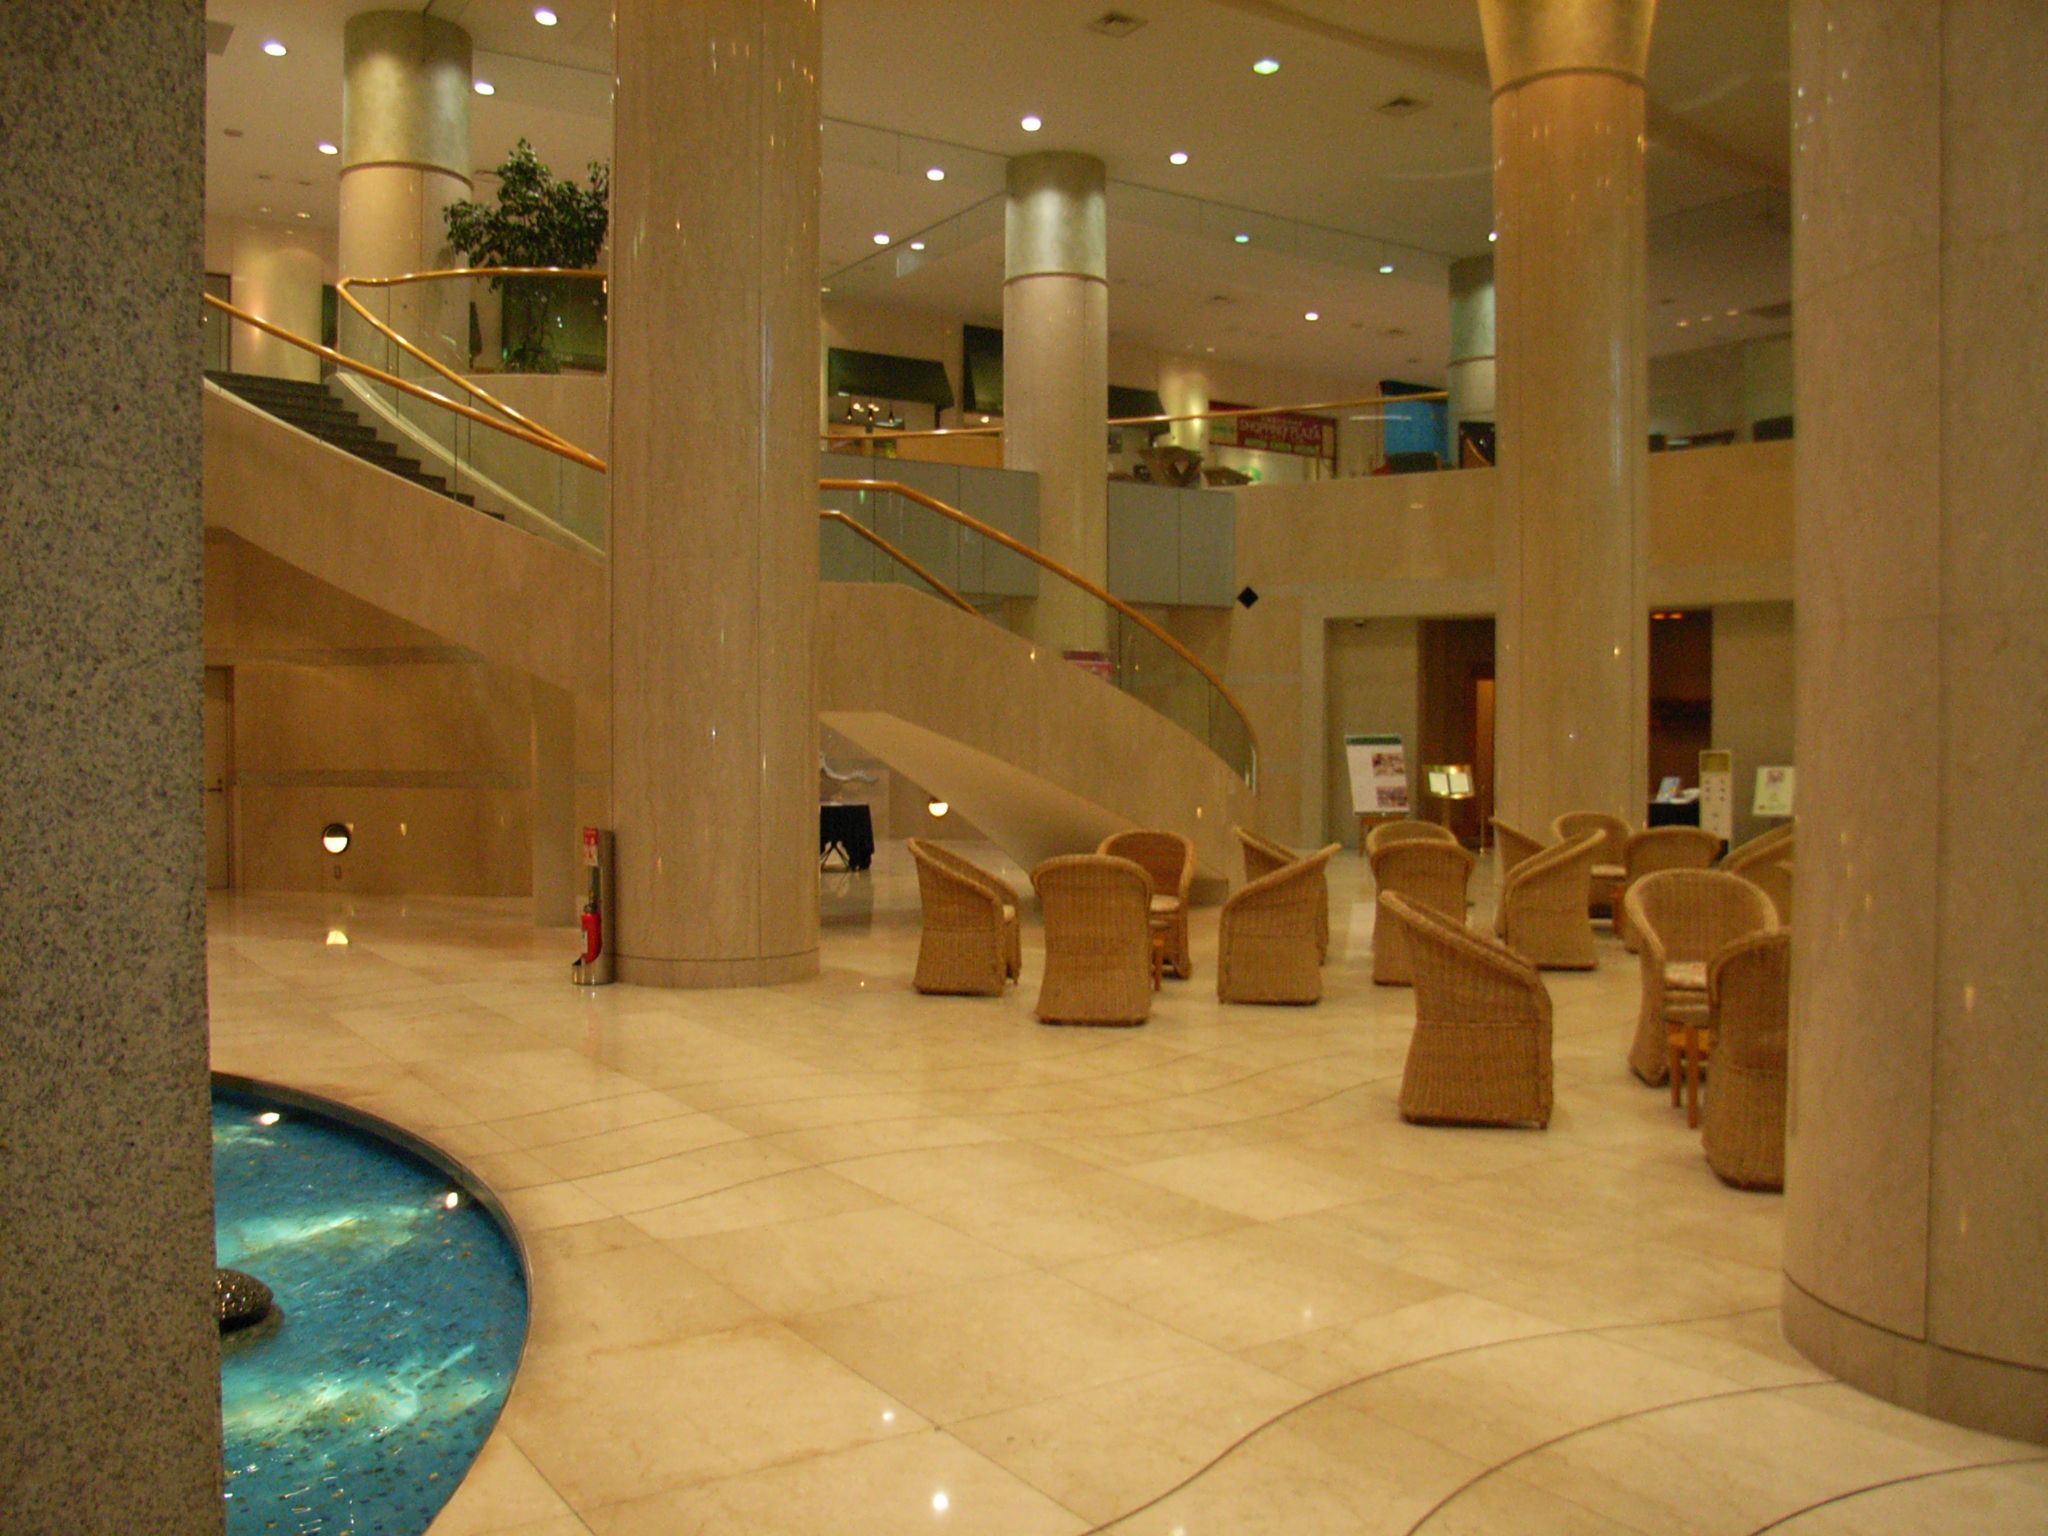 the large lobby has two spiral staircases and two sets of seating